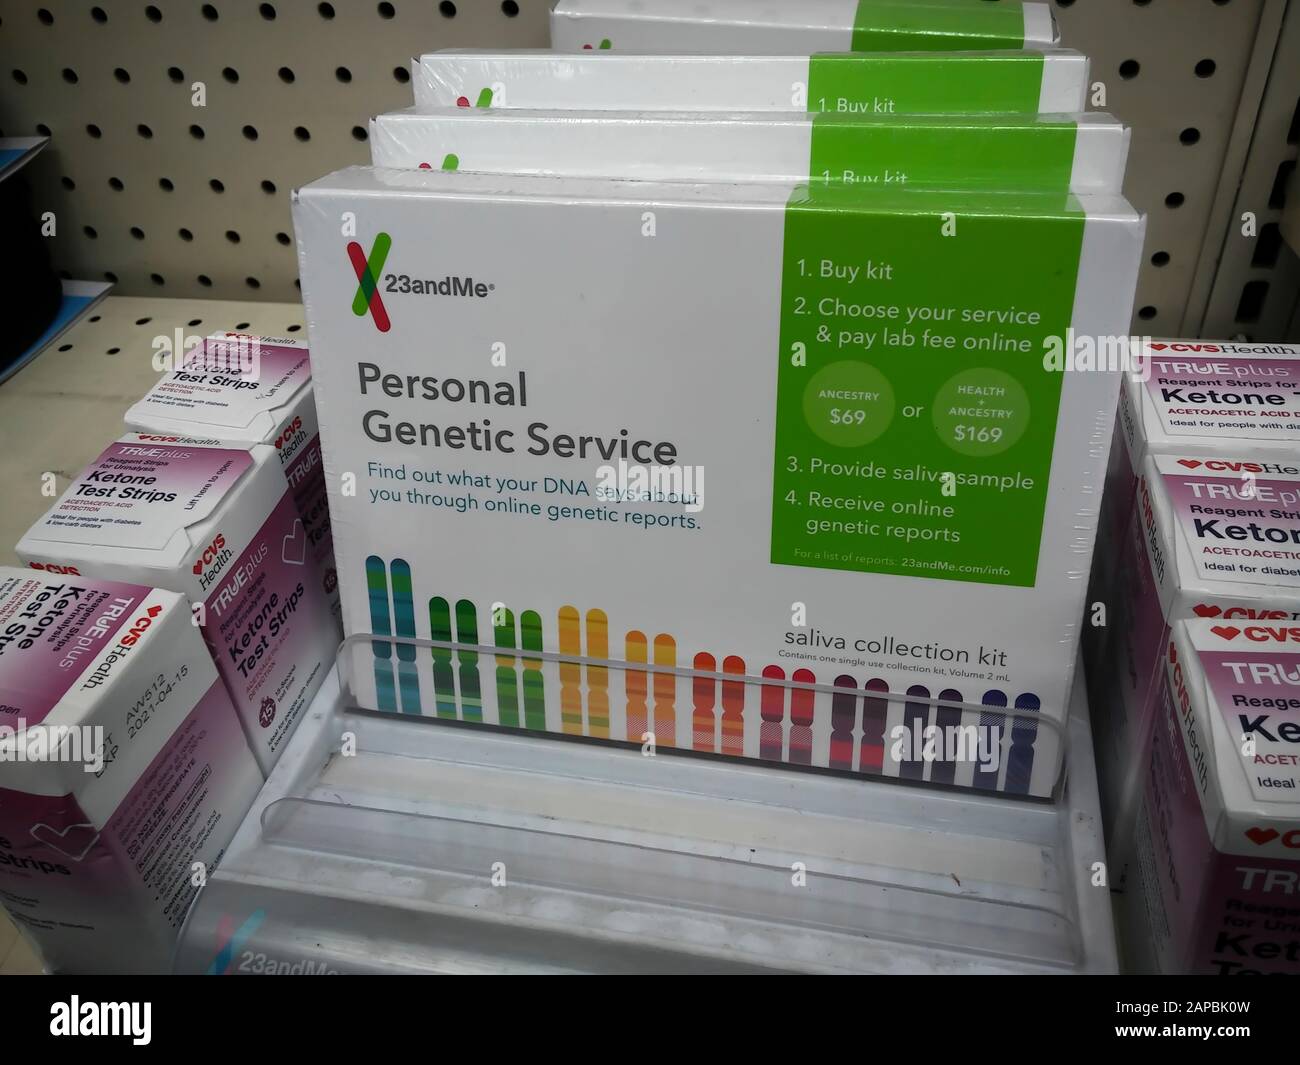 Packages of 23andMe brand DNA kits in a drugstore in New York on Saturday, January 11, 2020. (© Richard B. Levine) Stock Photo